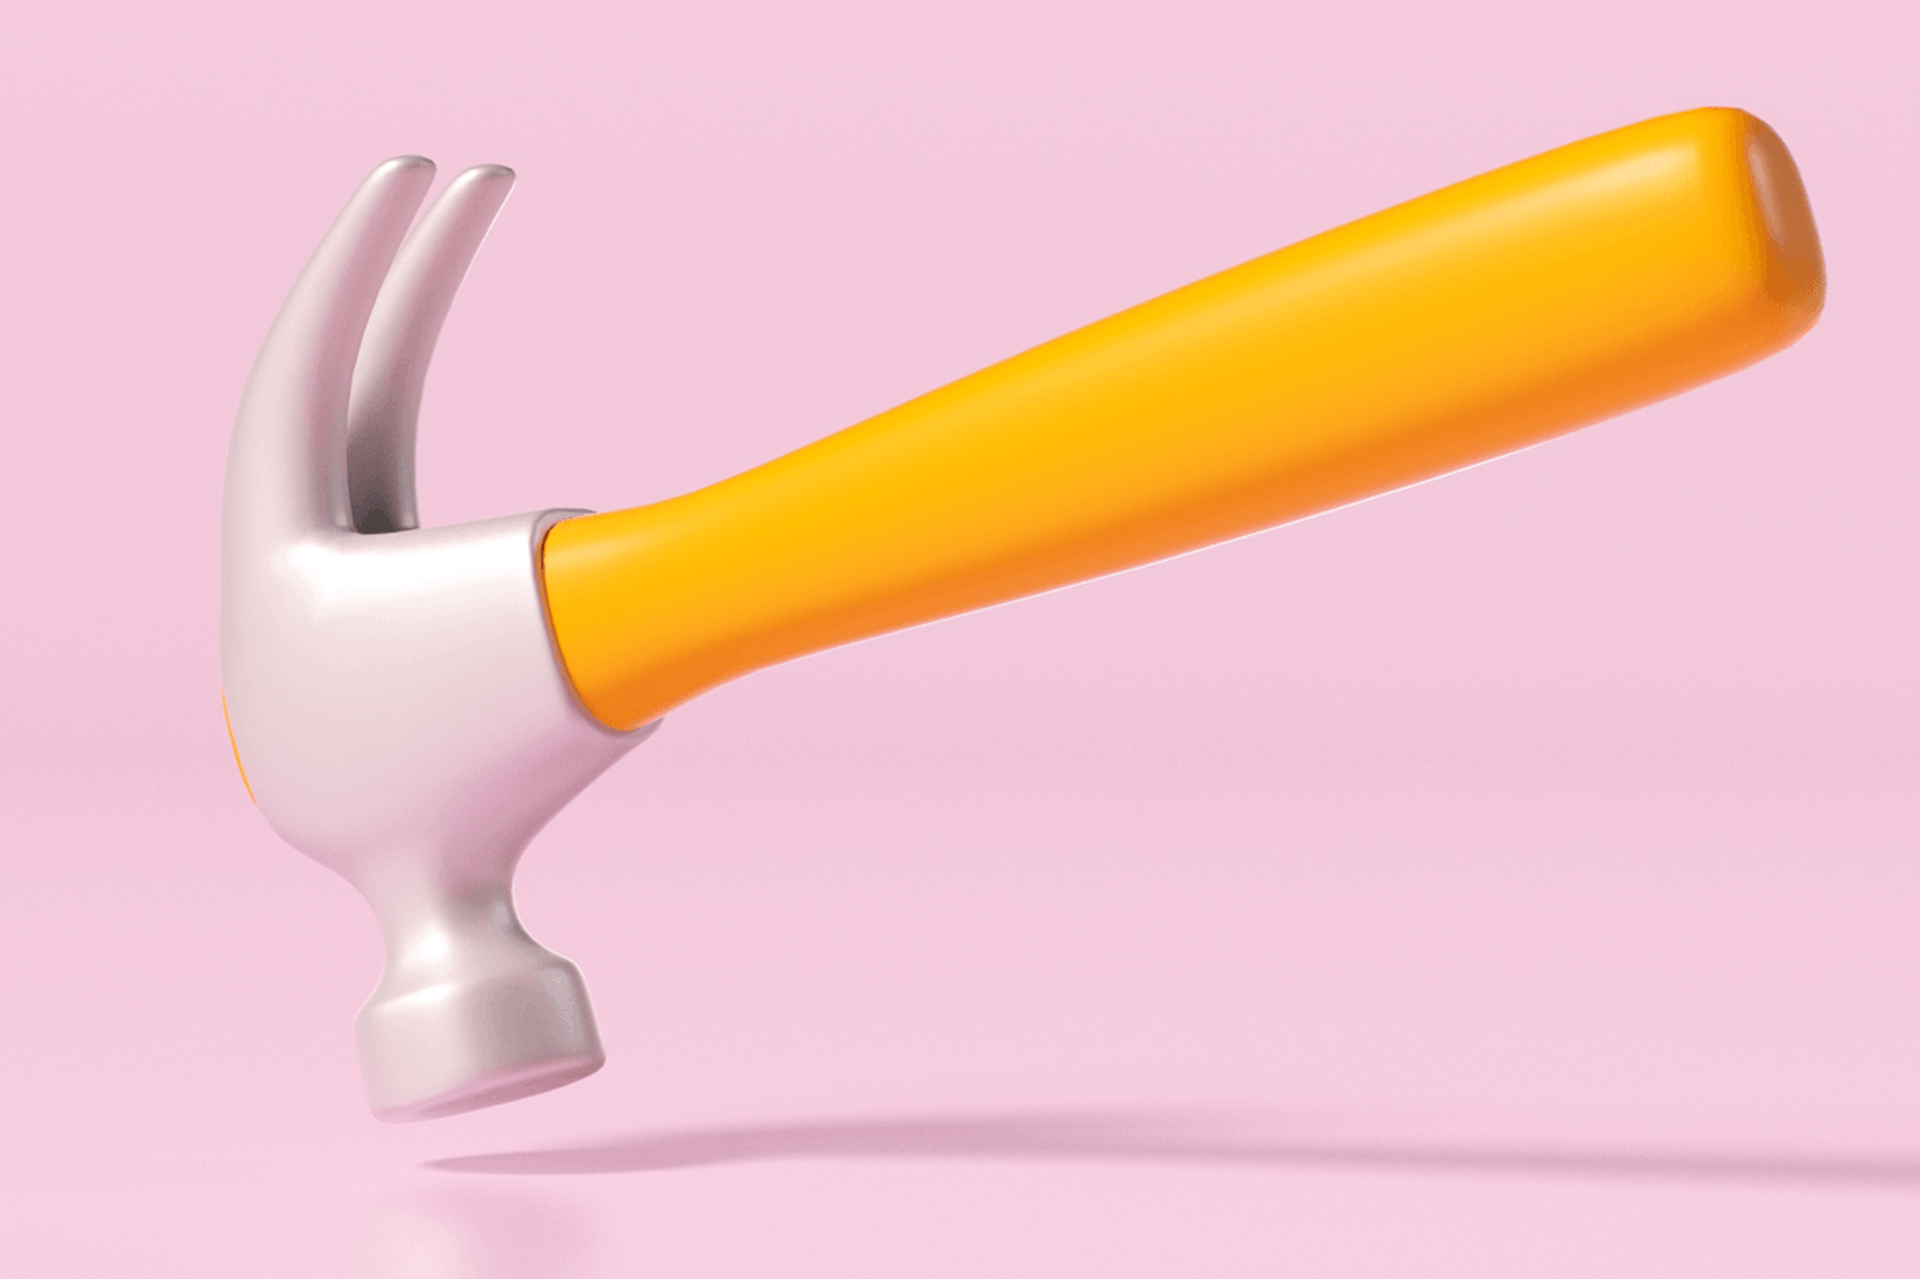 Illustration showing a large hammer on a pale pink background. Building brand equity blog post.